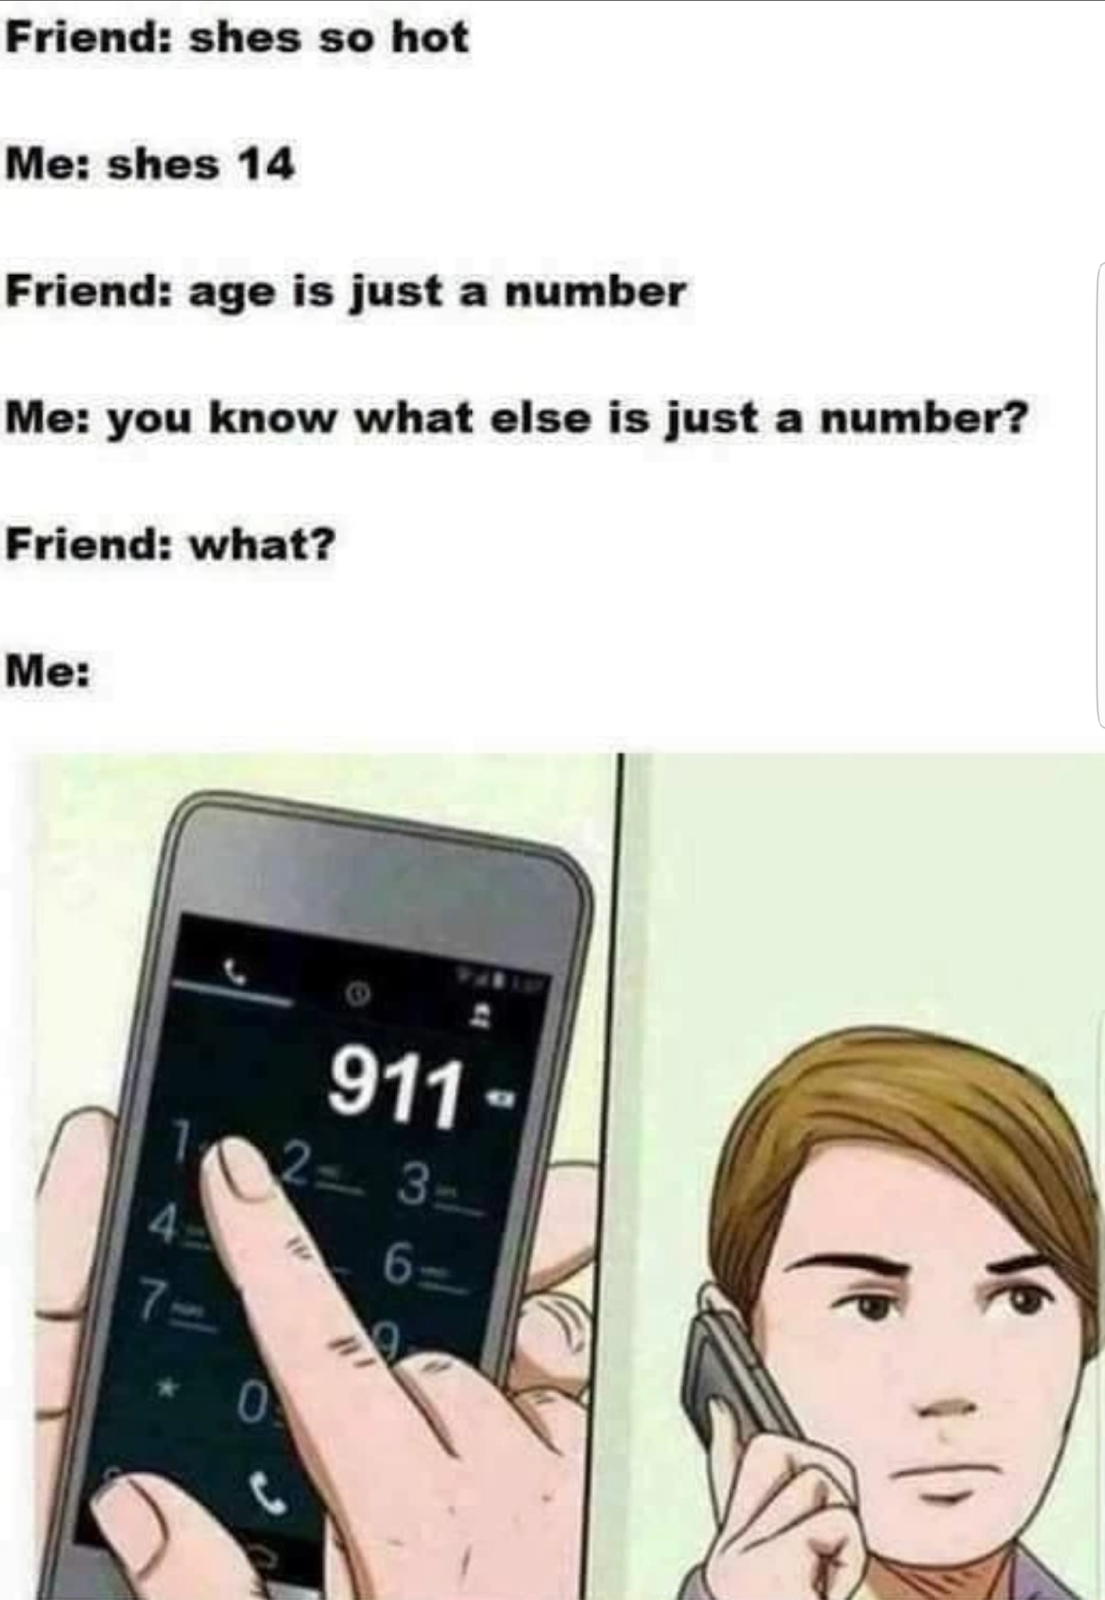 Age is just an emergency number? 